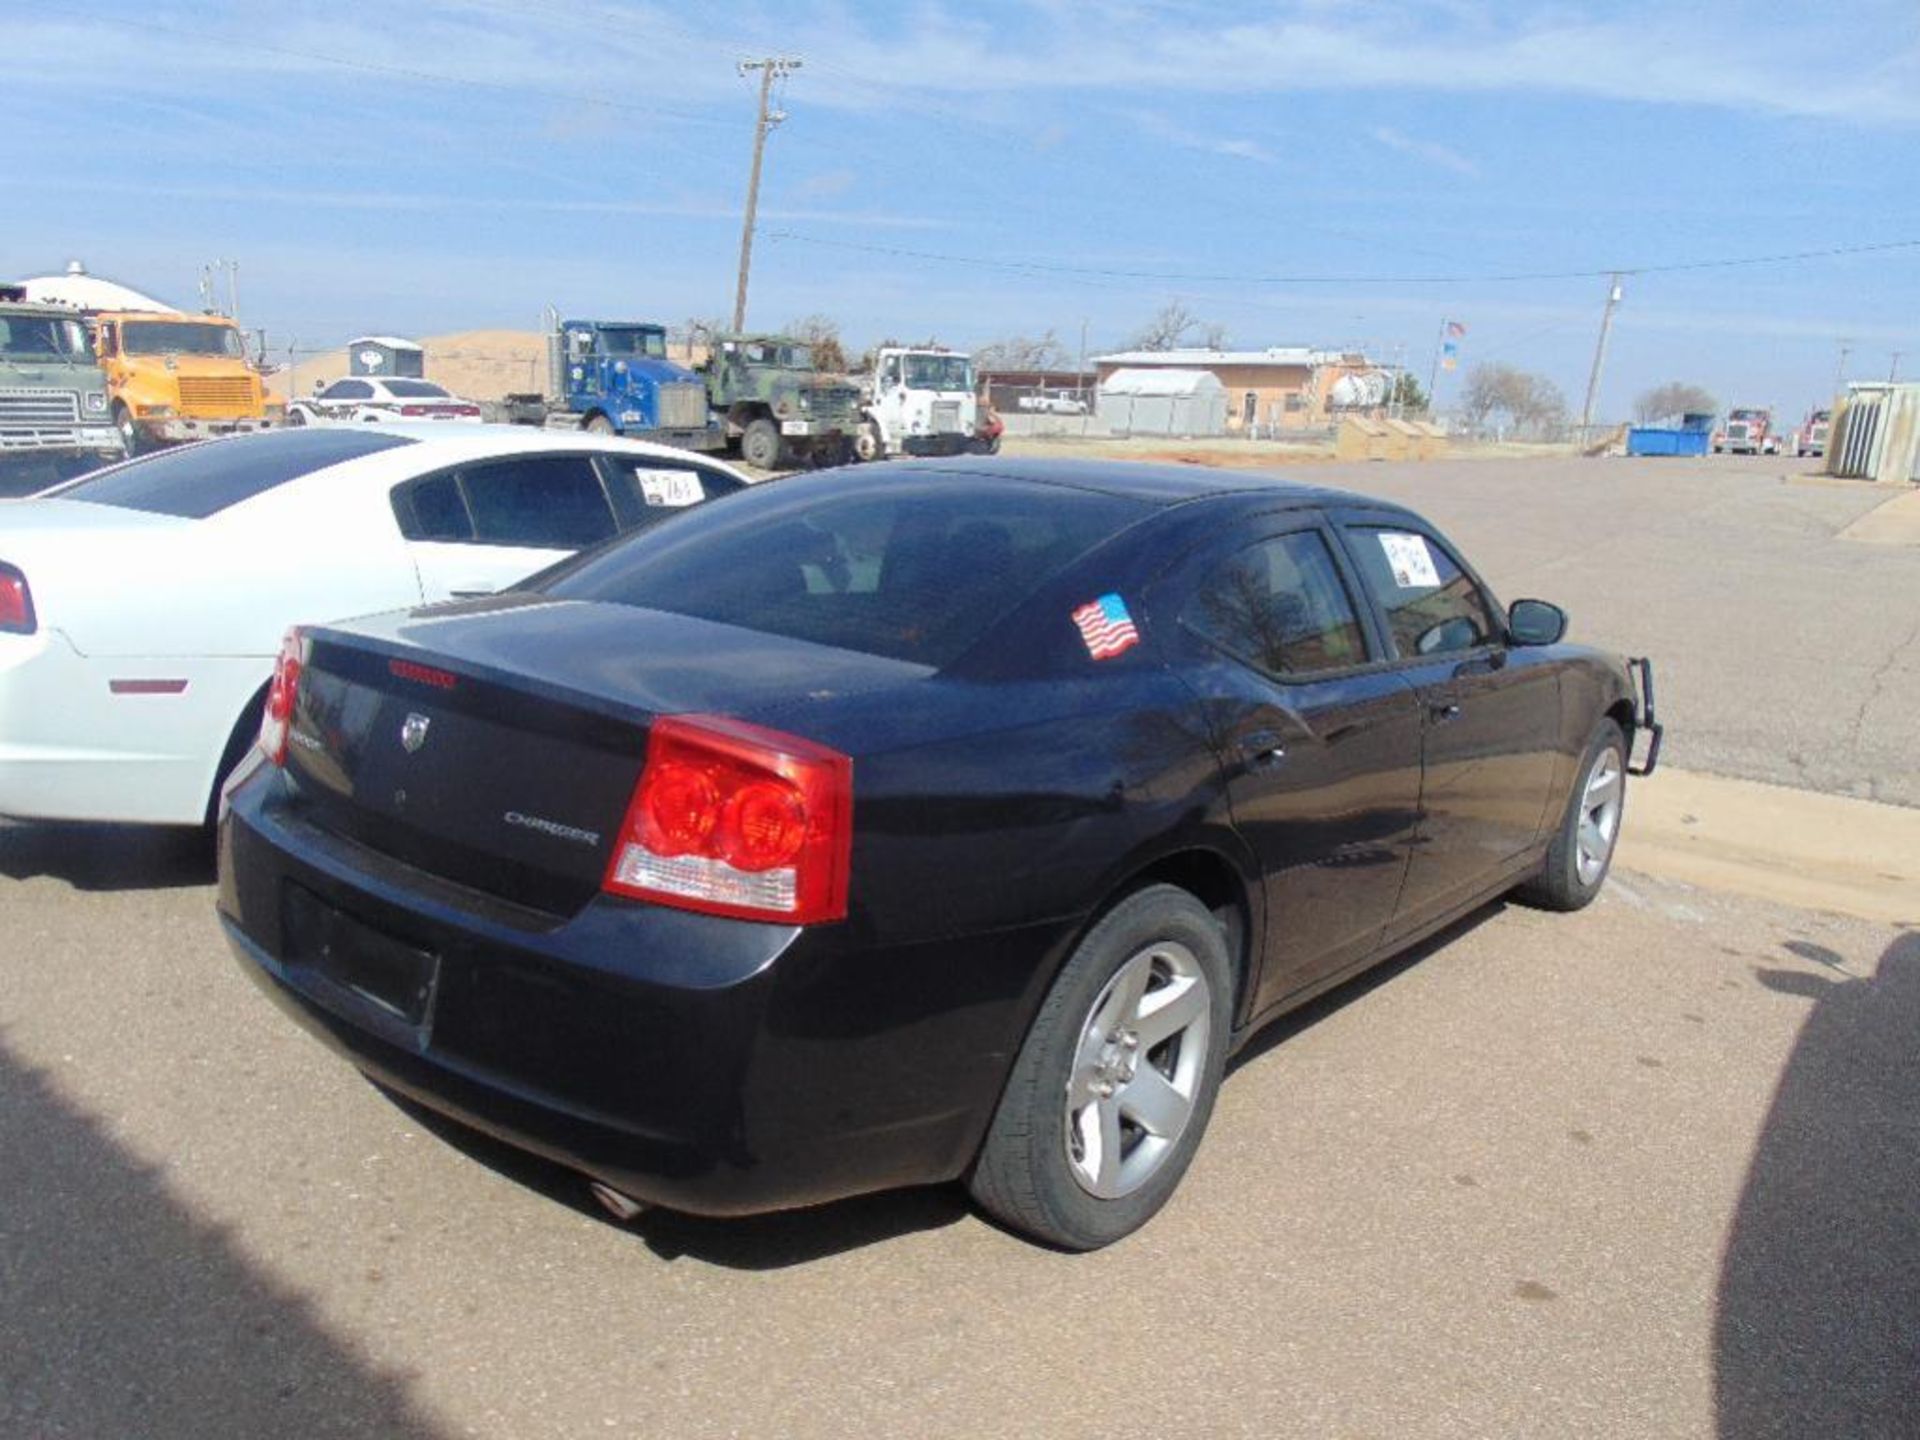 2009 Dodge Charger s/n 2bk3ka43tx9h548518, v8 gas eng, auto trans , od reads 154896 miles - Image 4 of 7